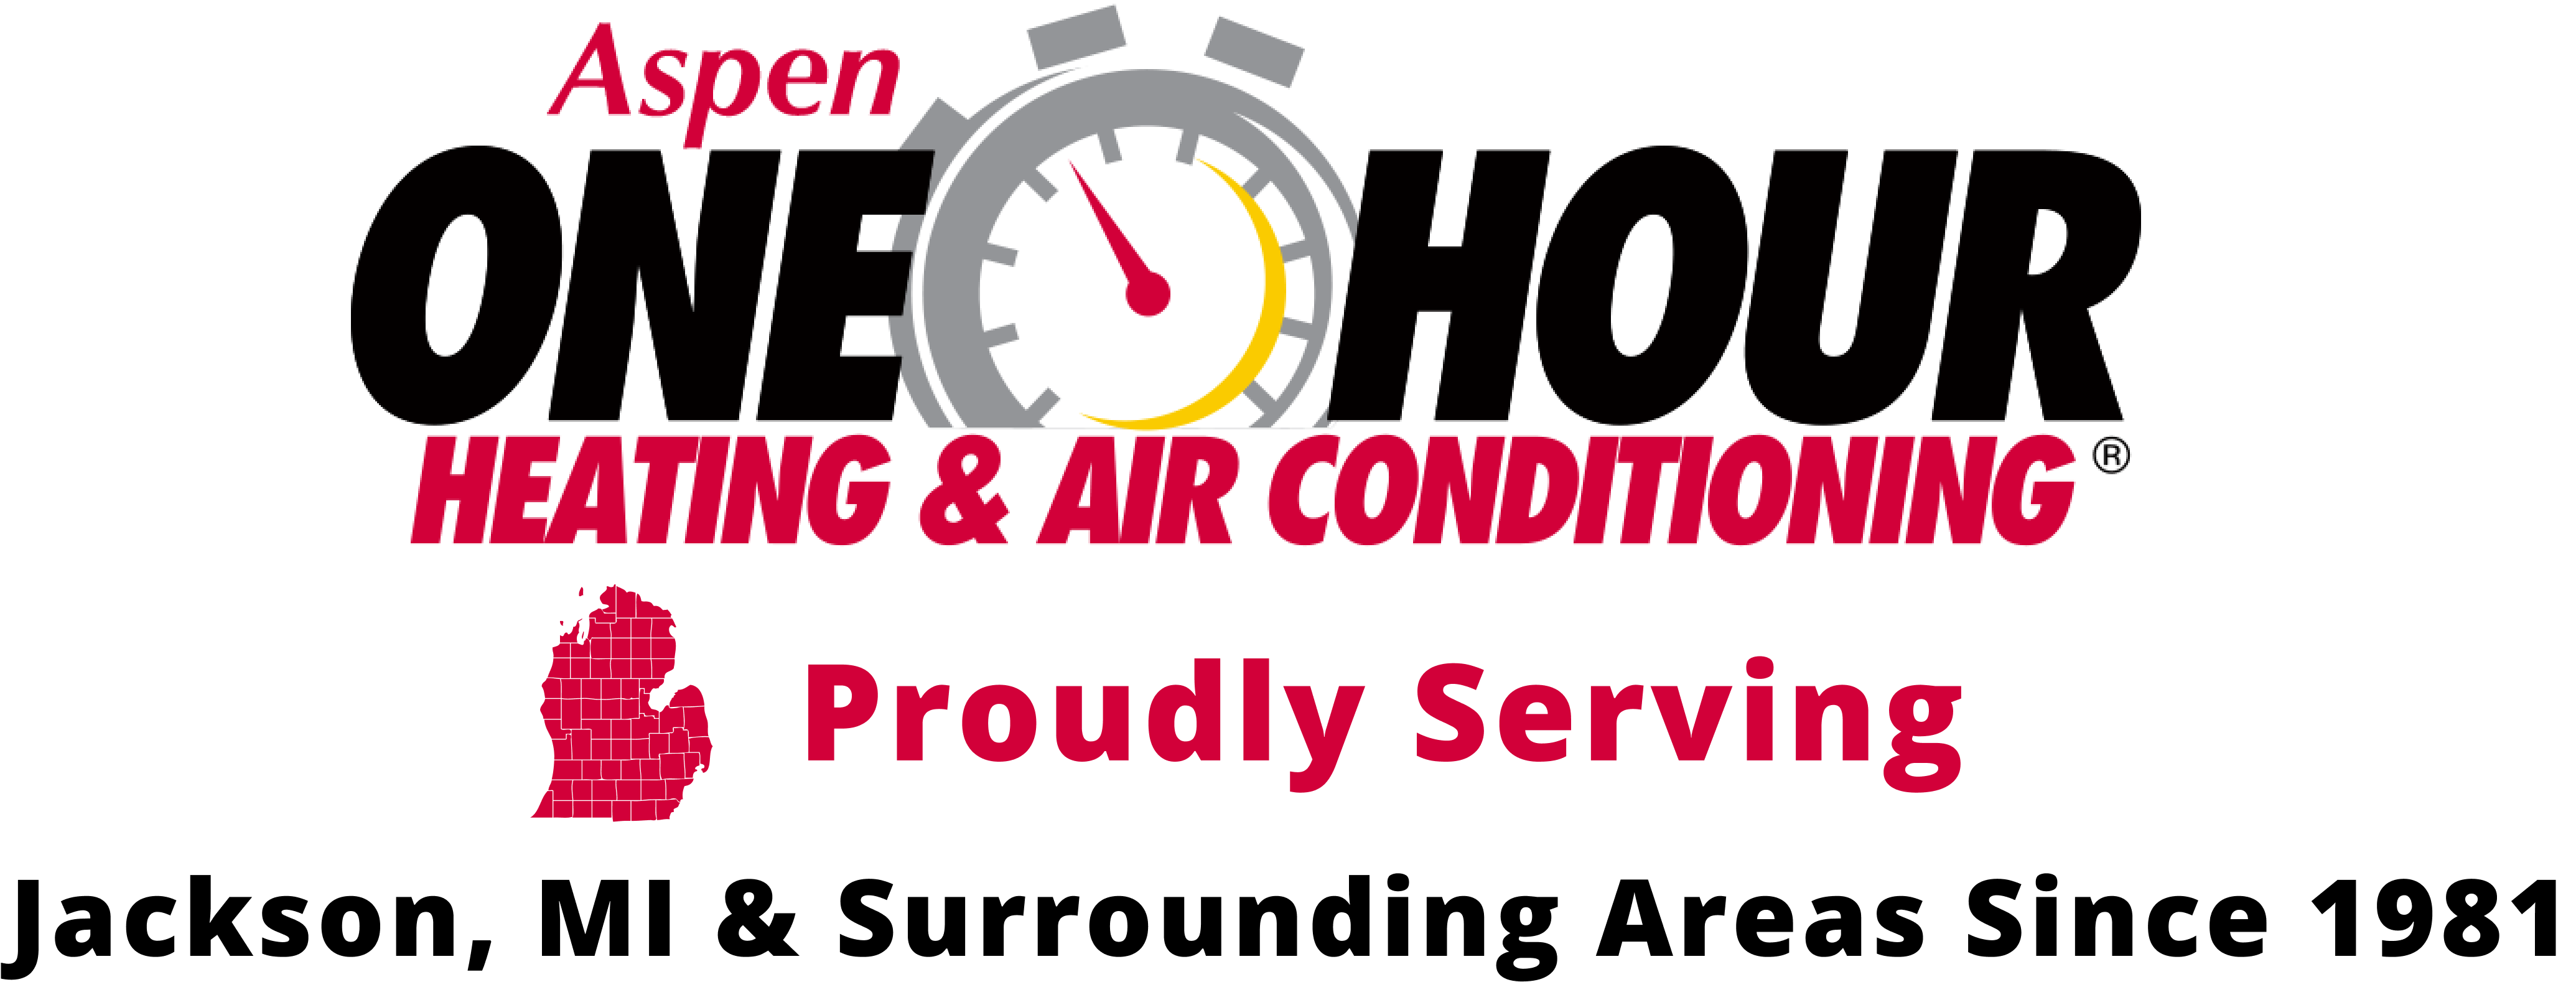 Logo of aspen heating & air conditioning featuring a stopwatch graphic, bold text, and a silhouette of the state of utah, with the tagline "proudly serving.